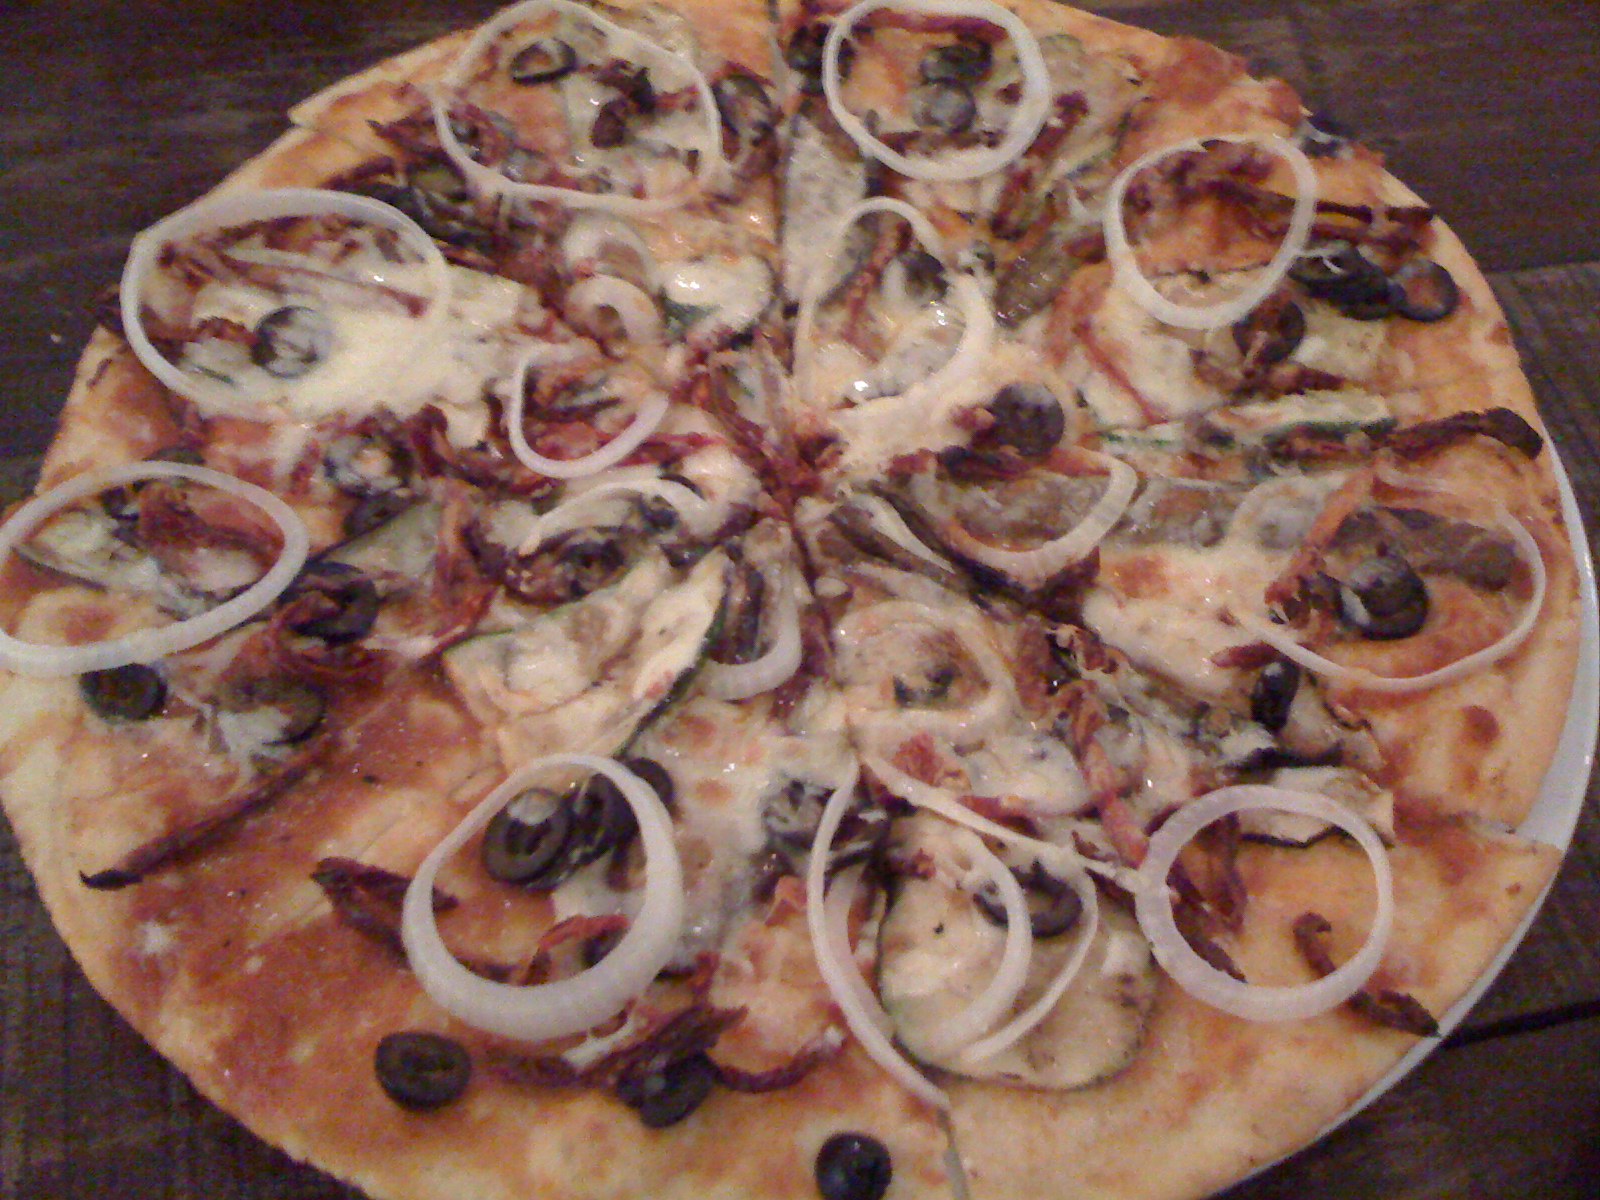 the cooked pizza has onions and black olives